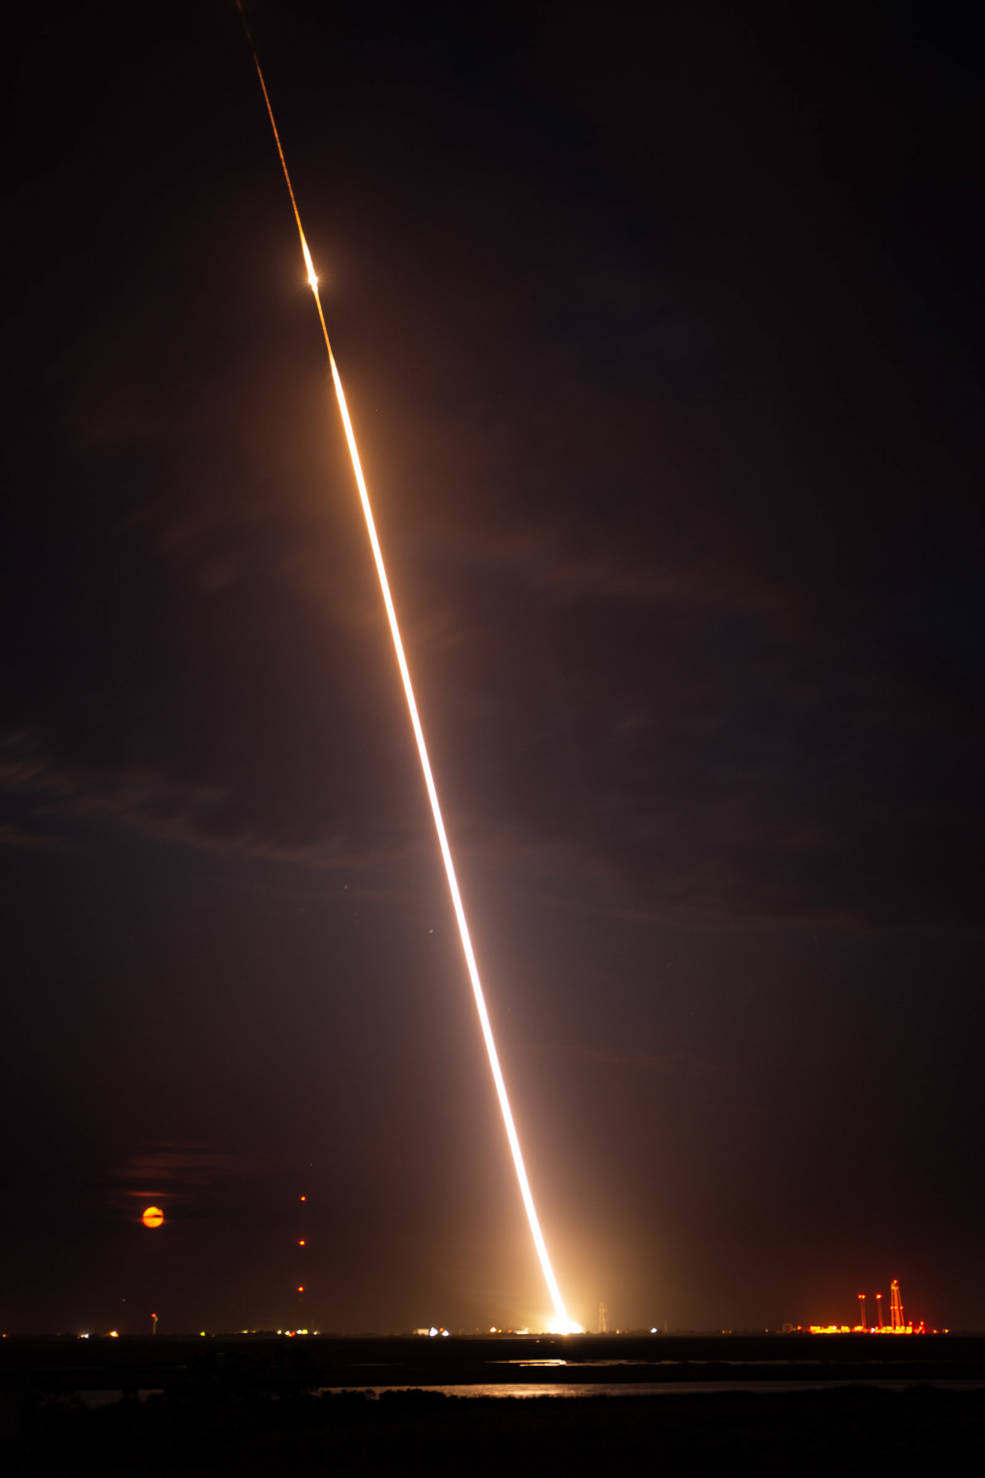 VIPER launches from Wallops Island, VA. Credit: Terry Zaperach